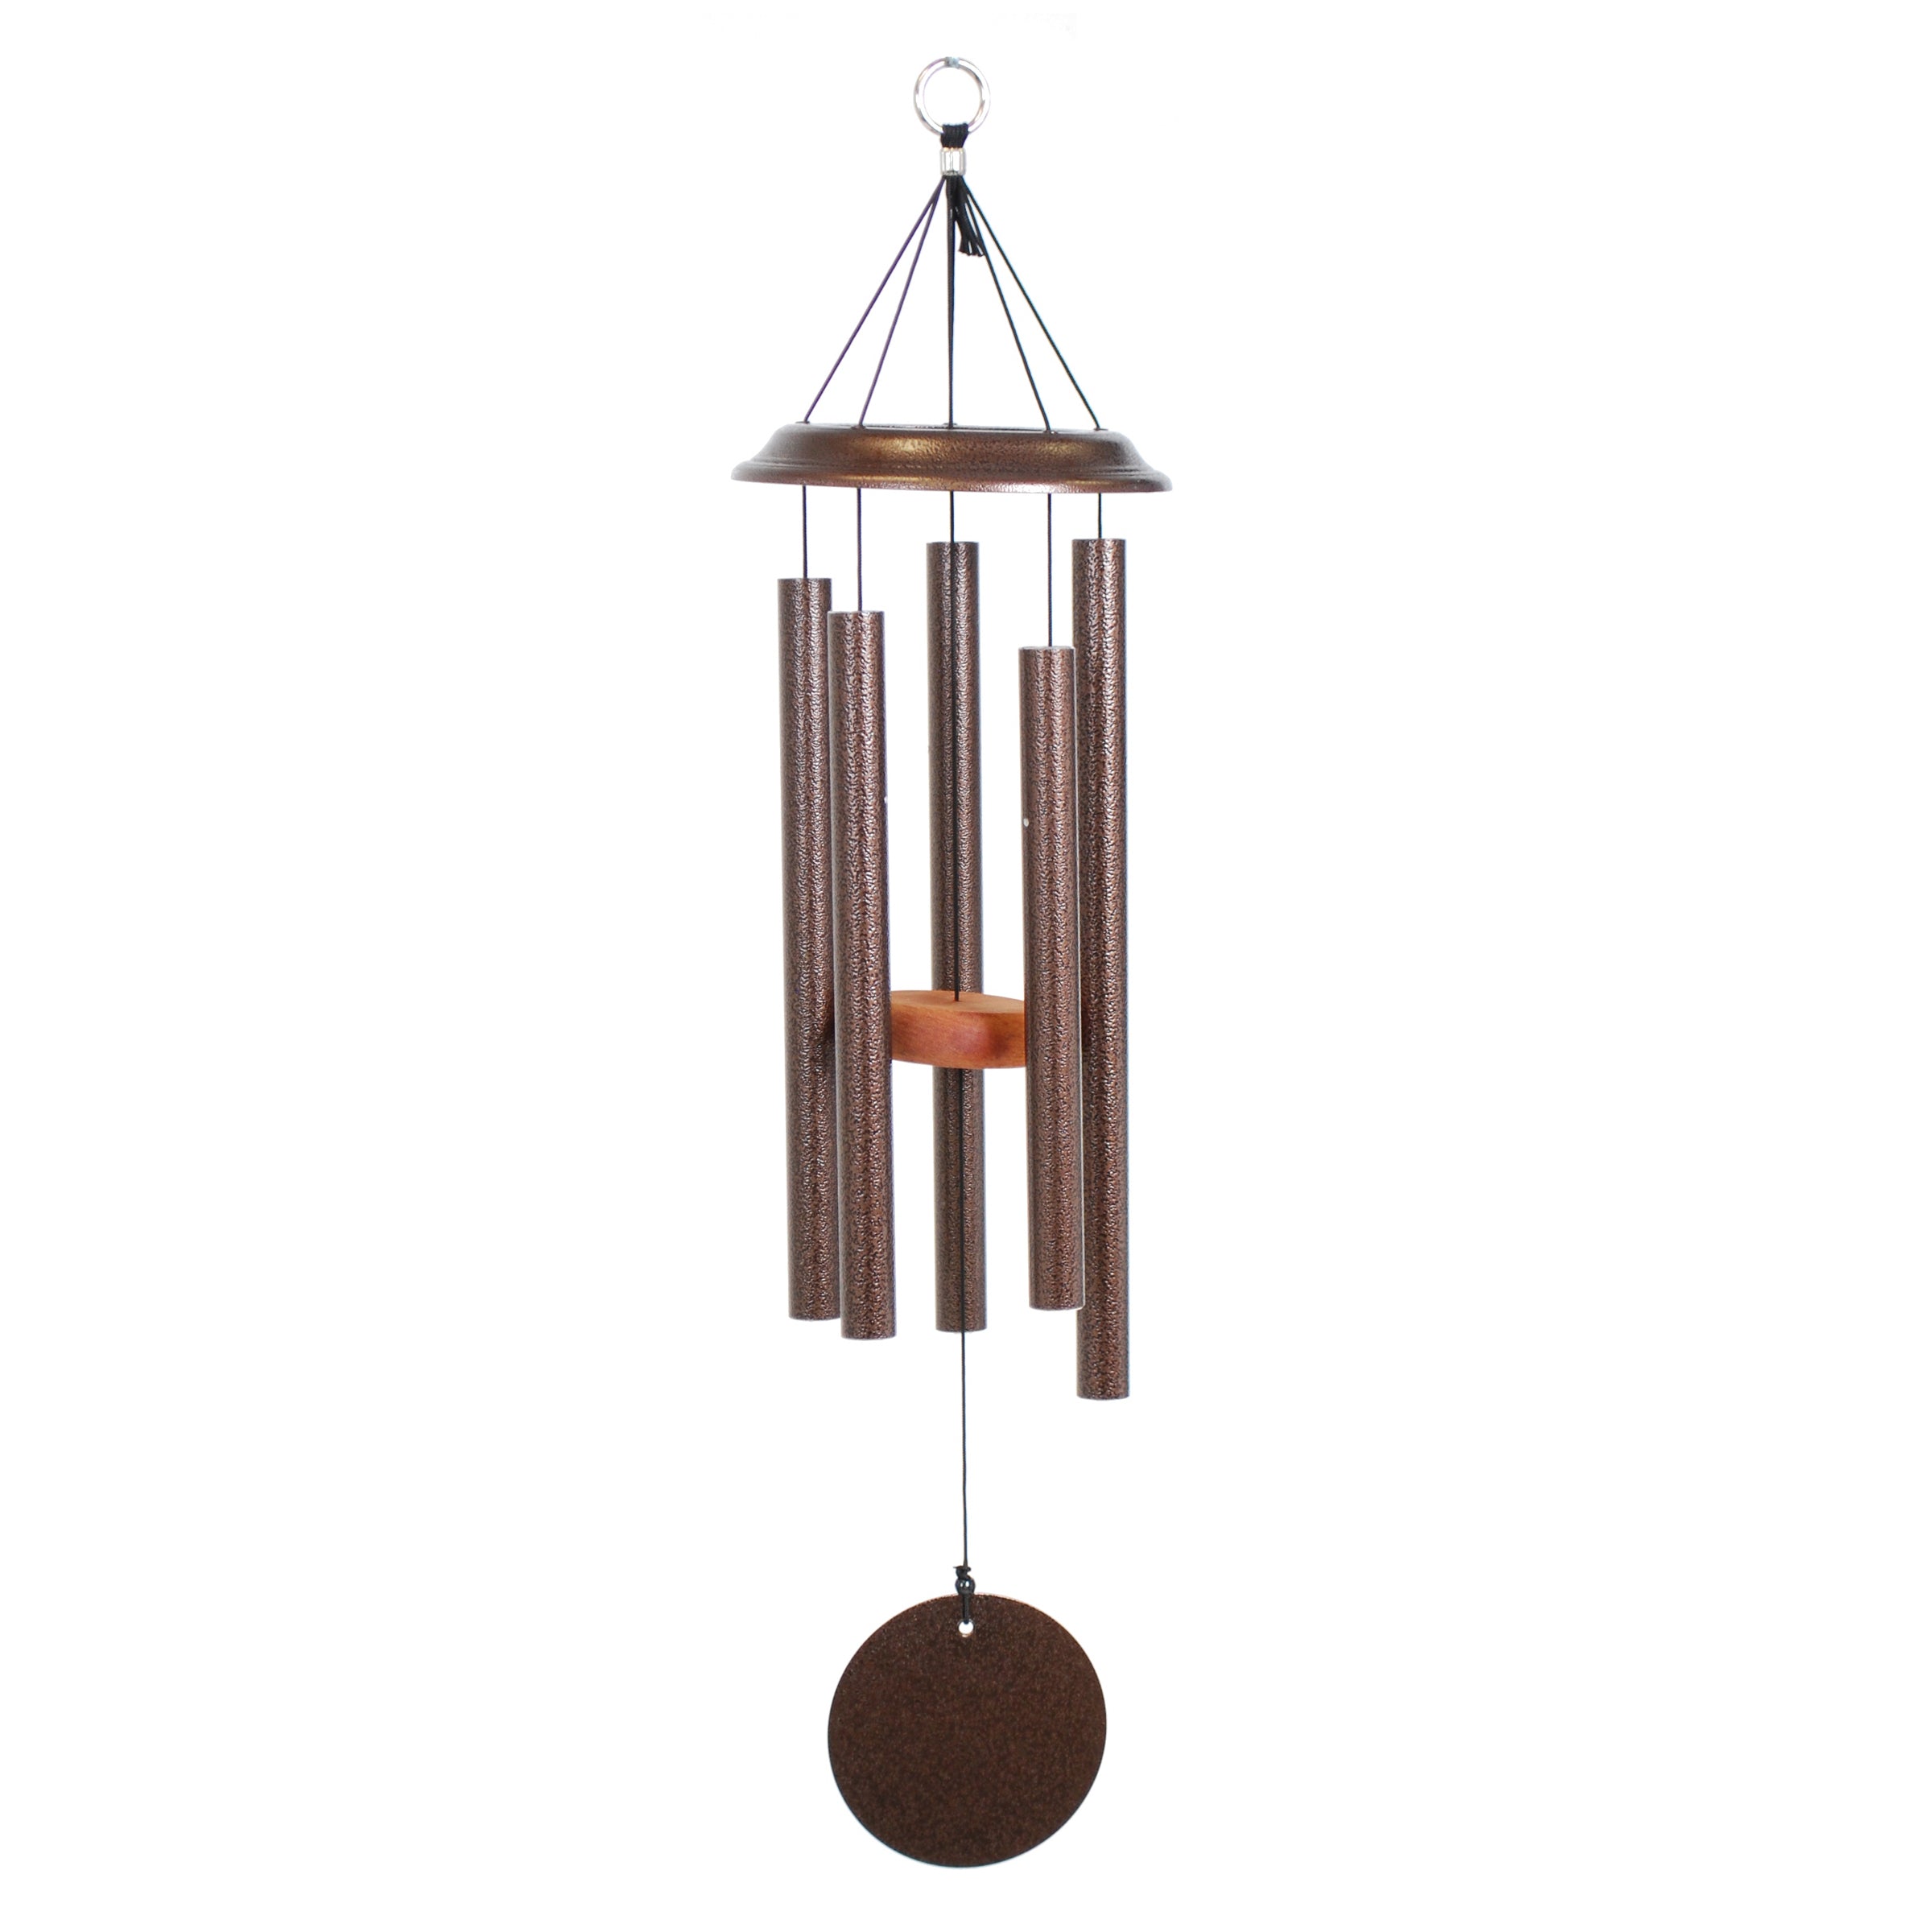 Wind River Shenandoah Melodies® 35 inch wind chimes